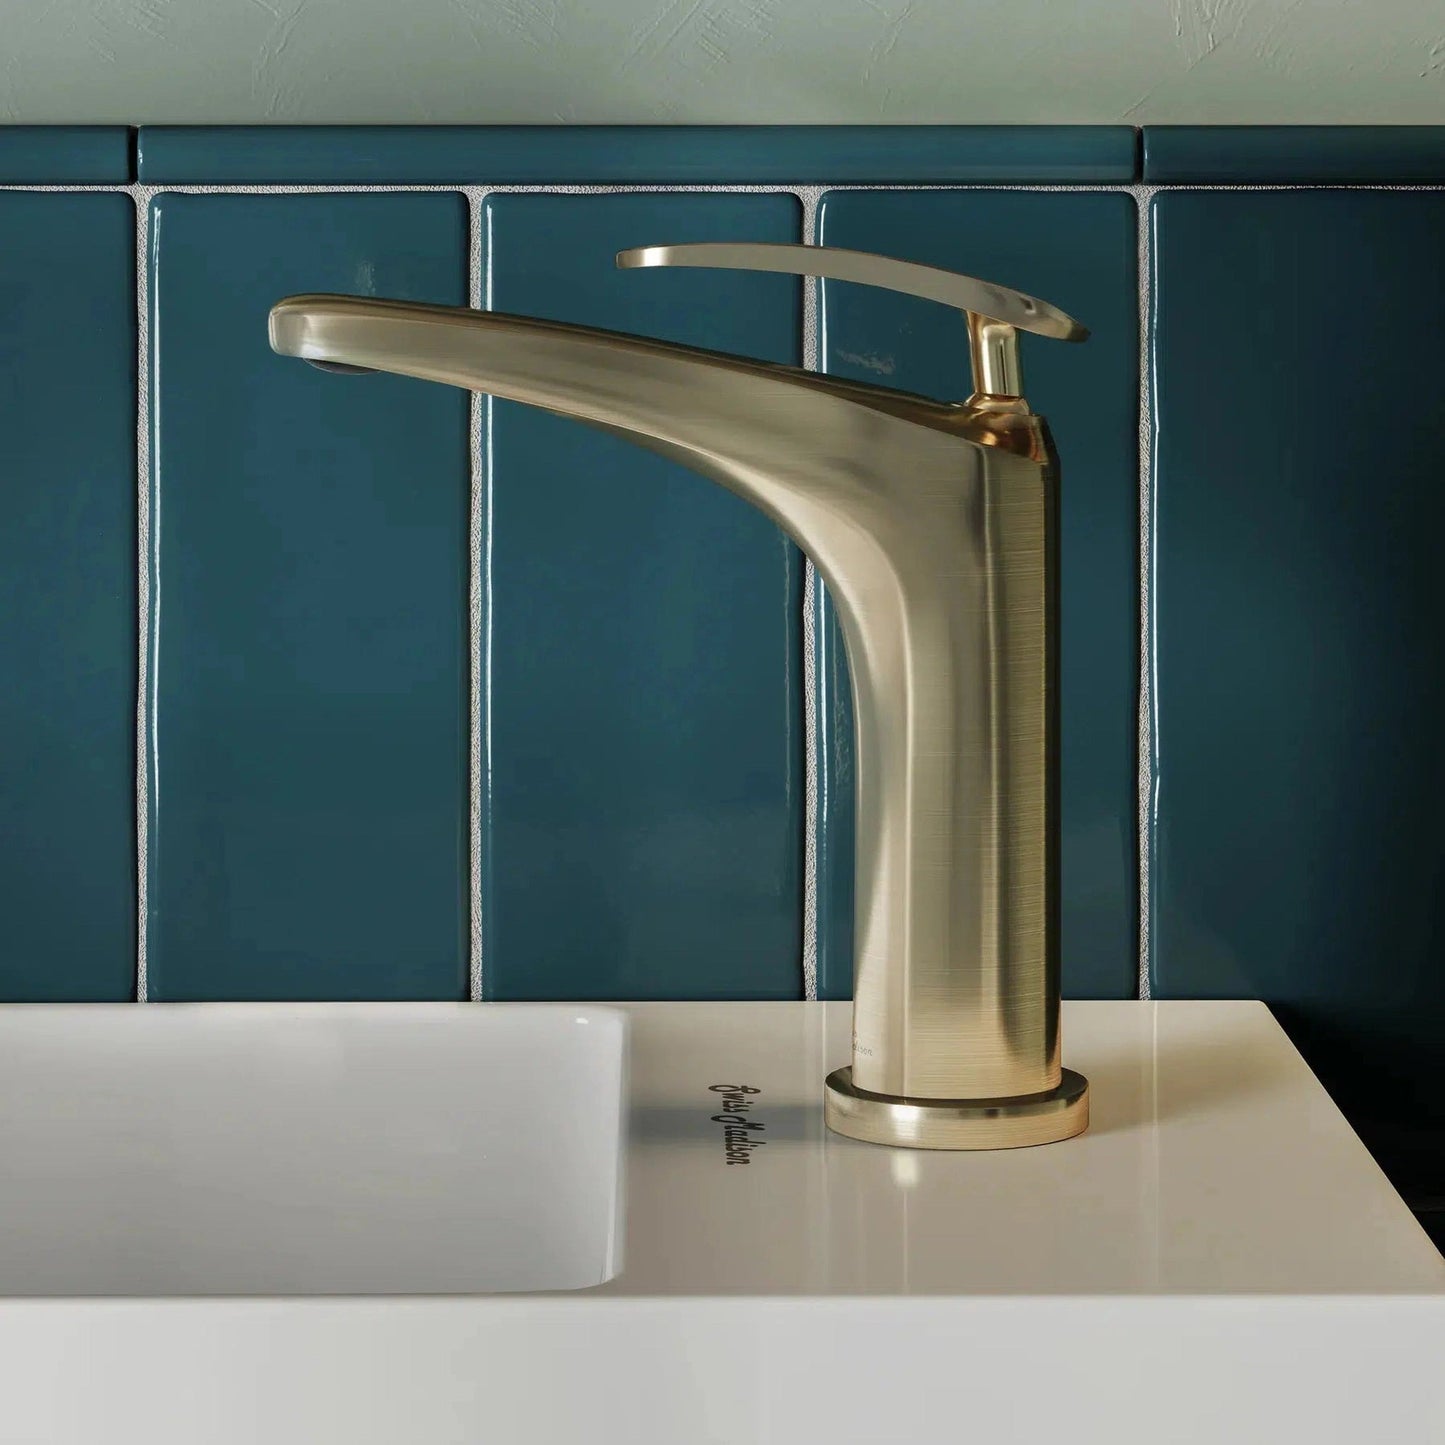 Swiss Madison Sublime 7" Brushed Gold Single Hole Bathroom Faucet With Flow Rate of 1.2 GPM